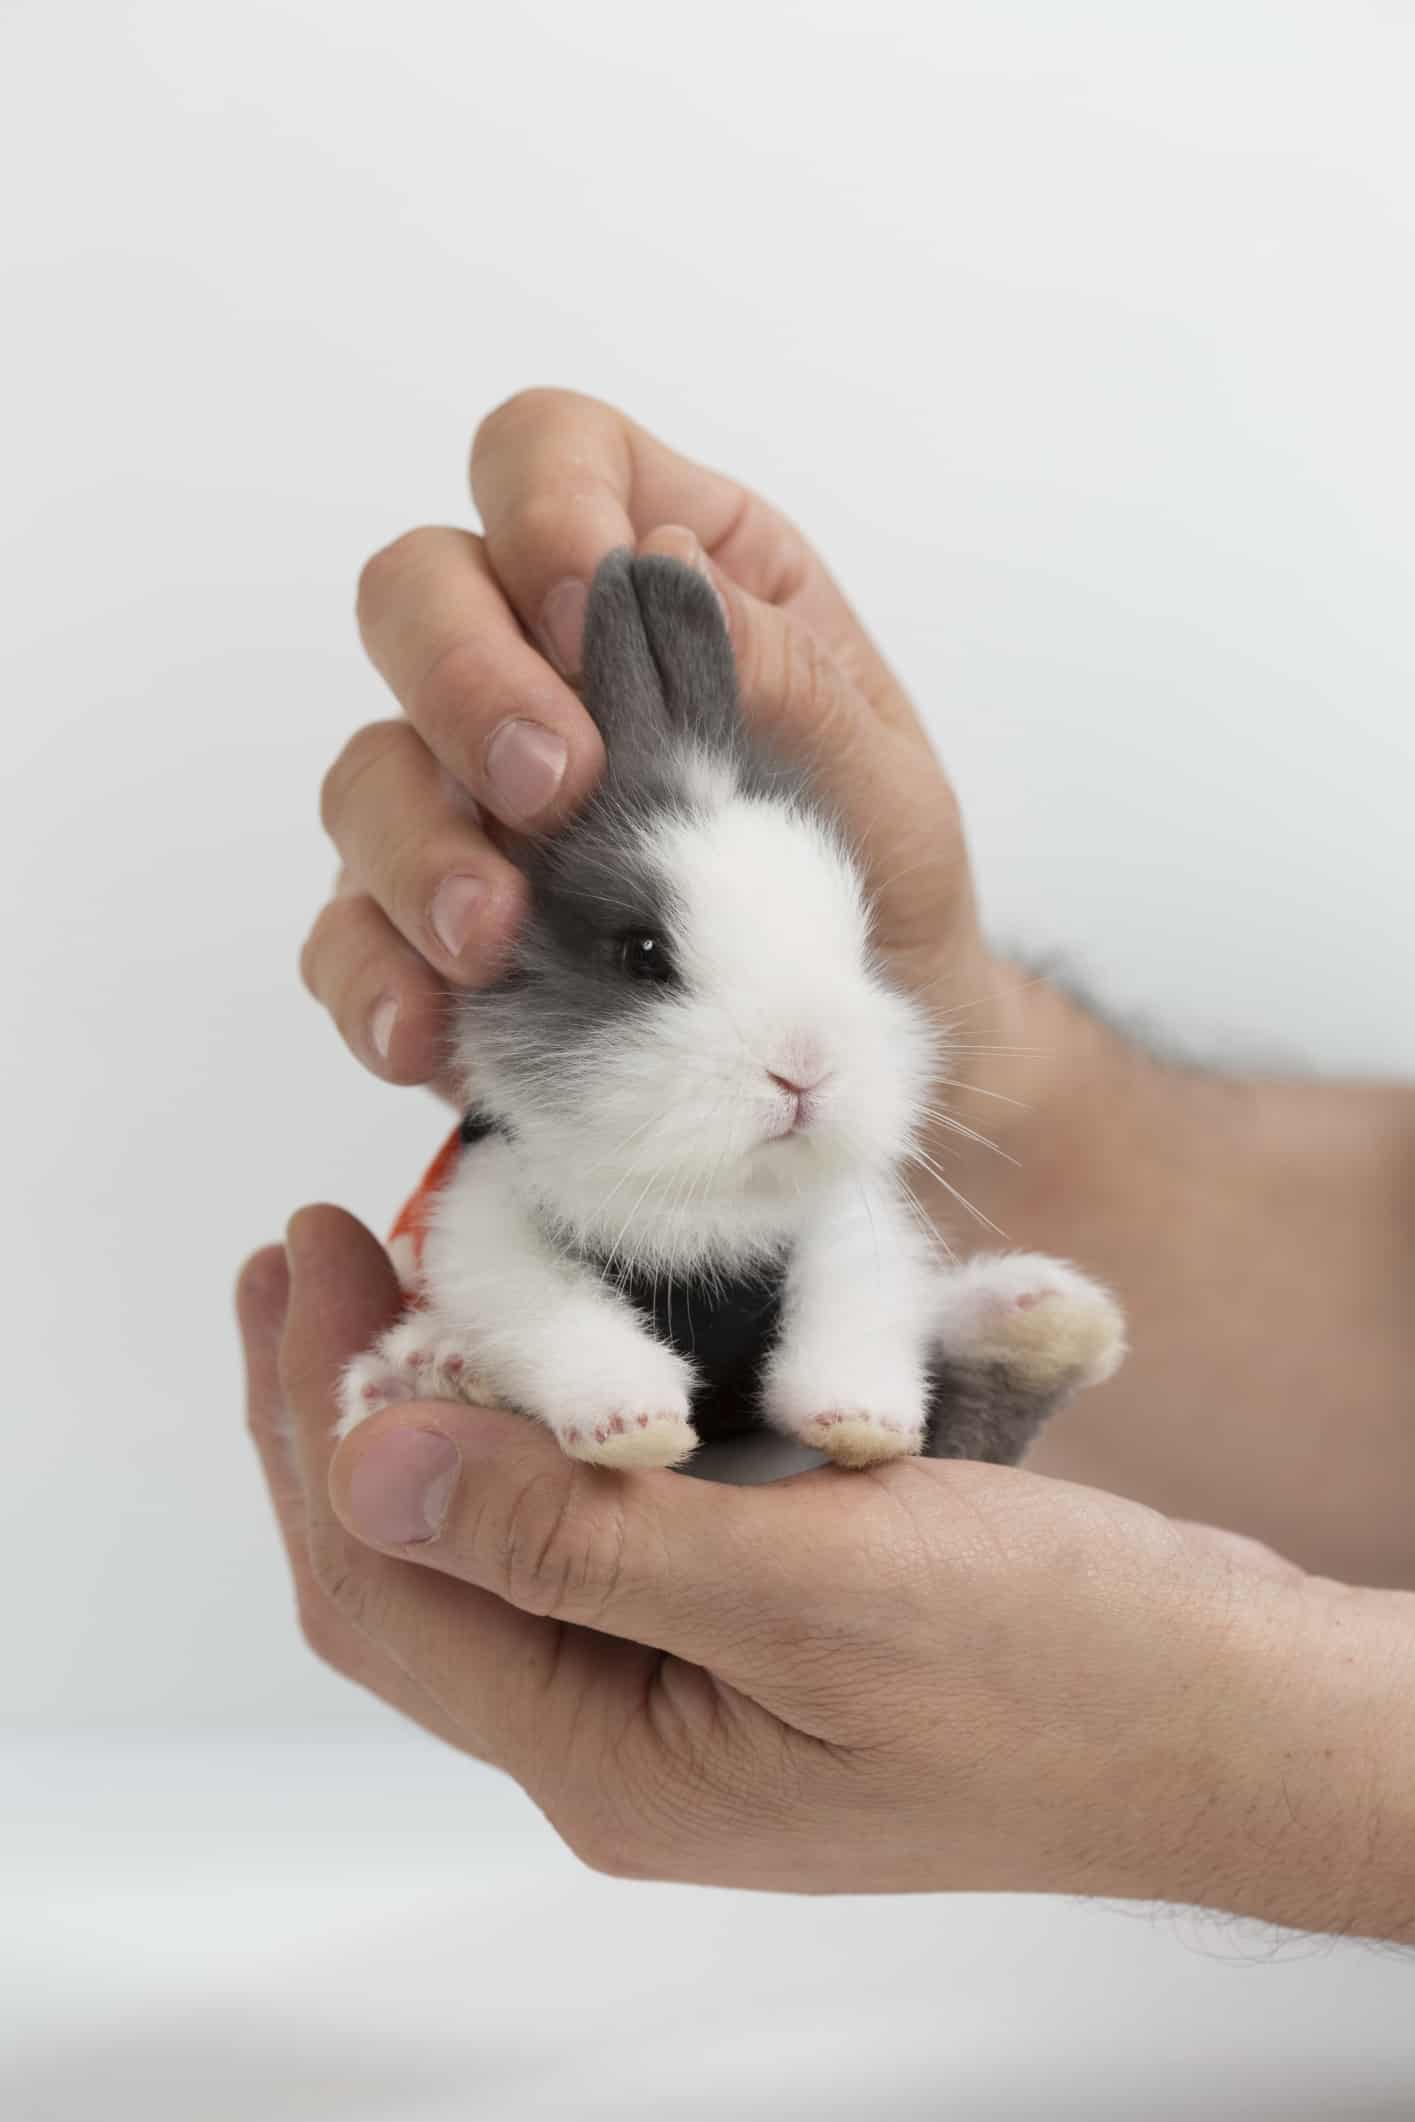 Witnessing The Miracle Of Life With 10 Day Old Bunnies